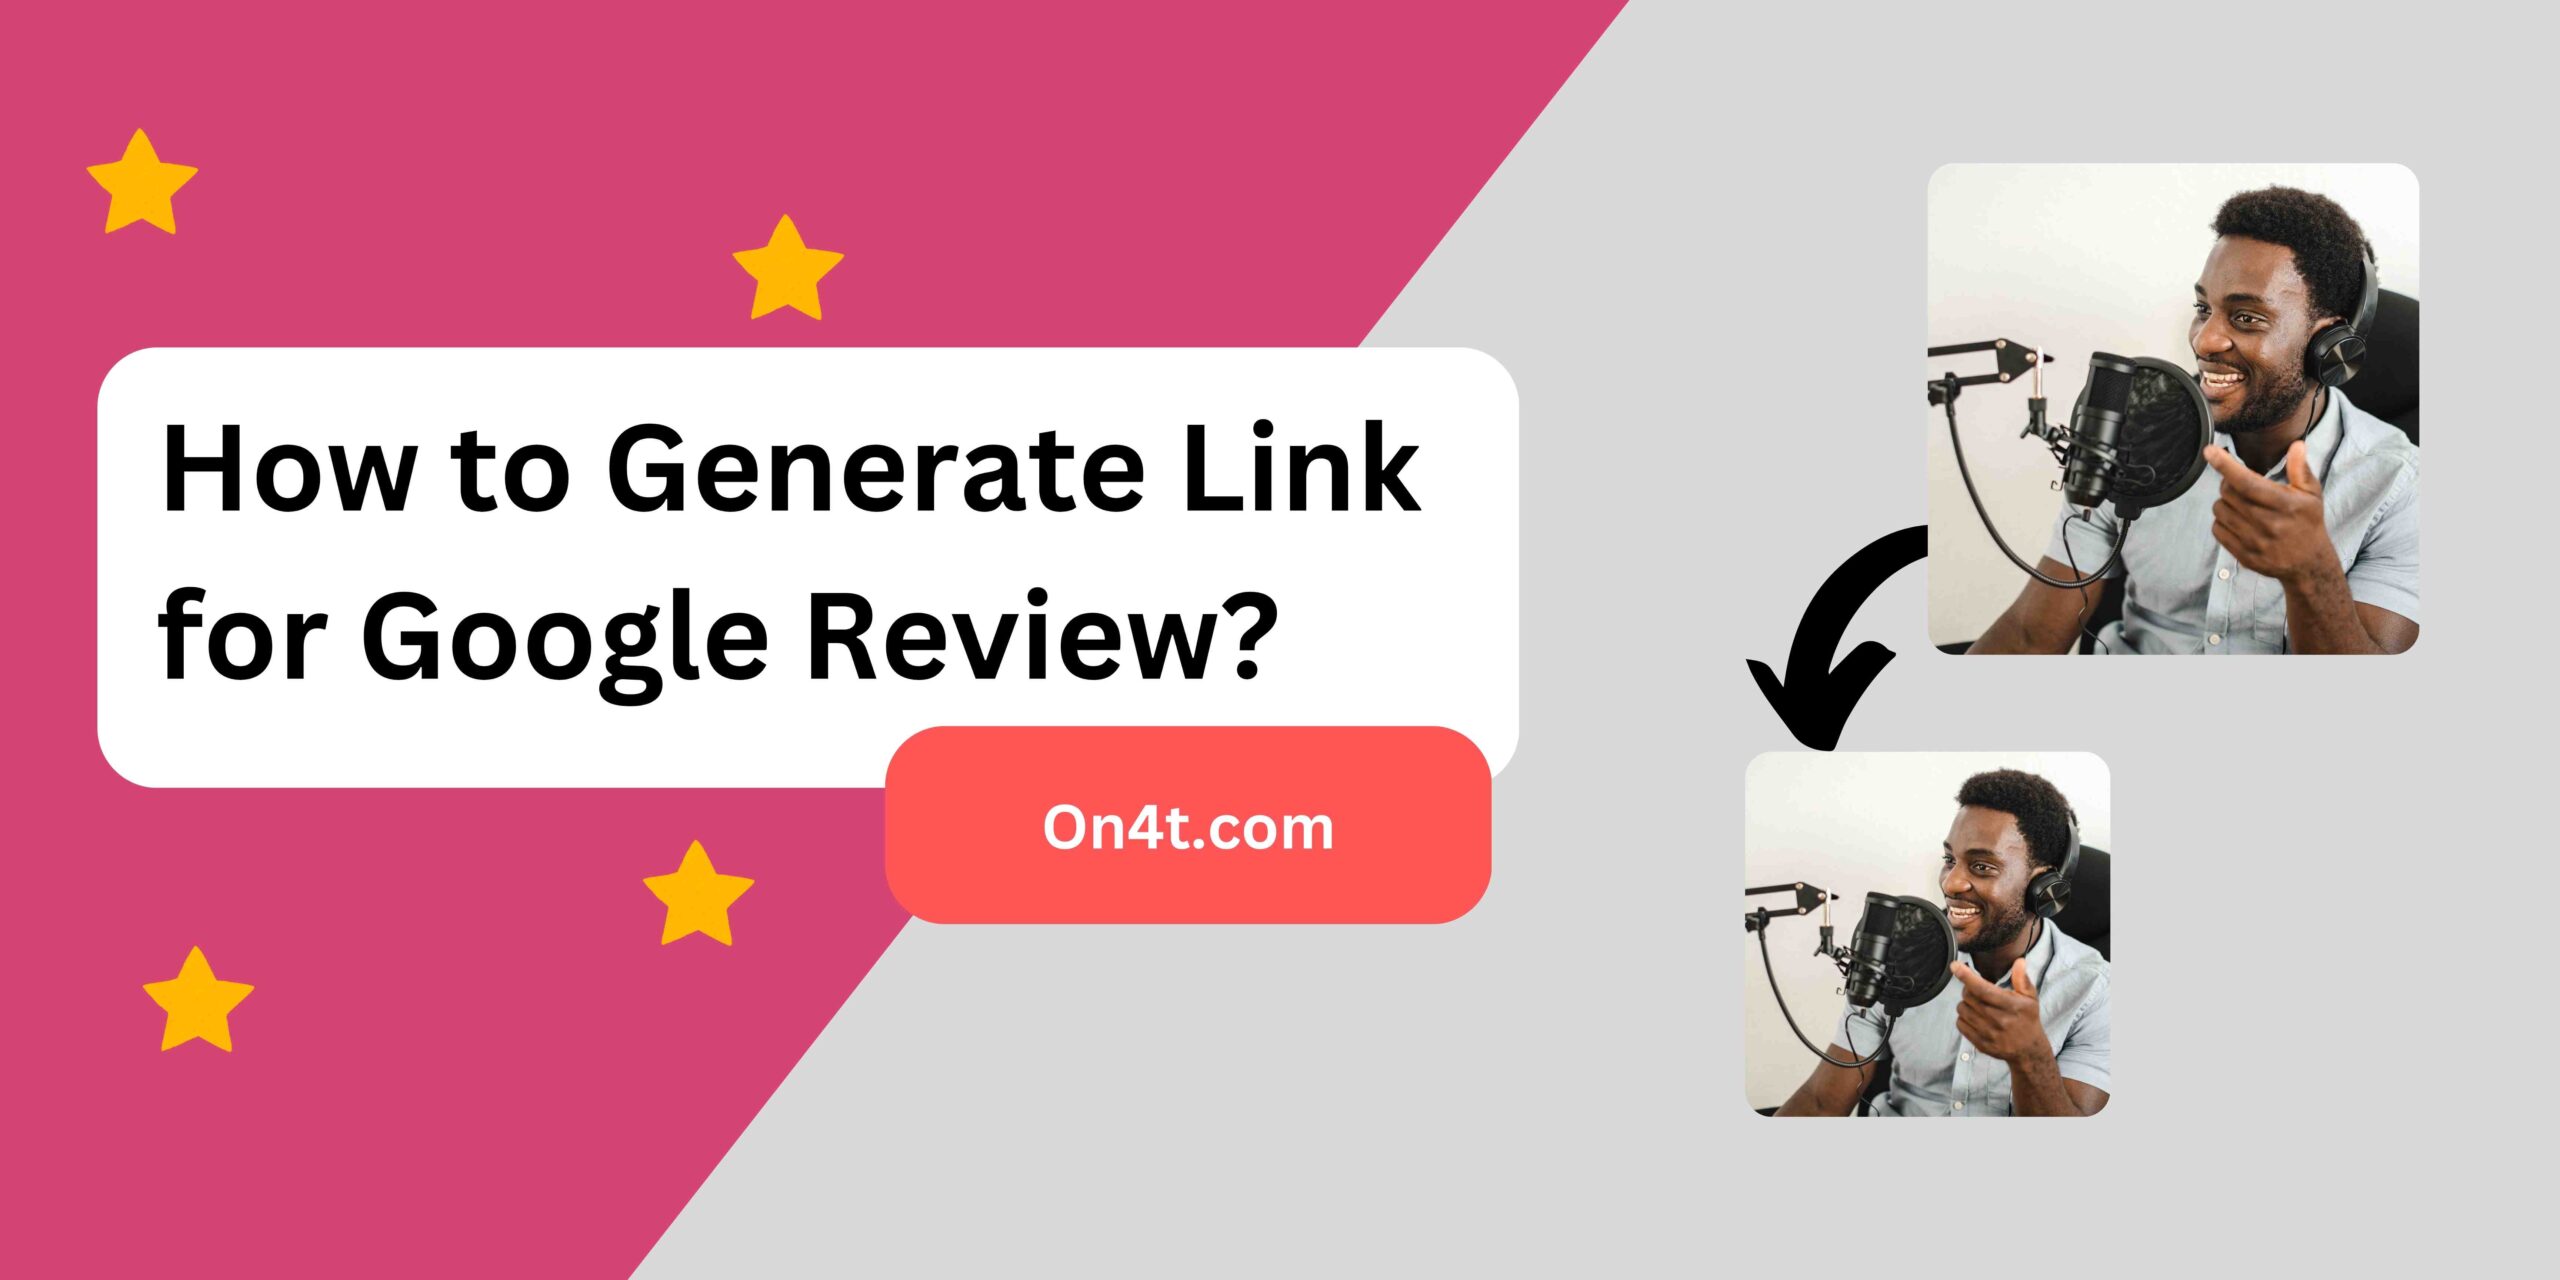 How to Generate Link for Google Review?